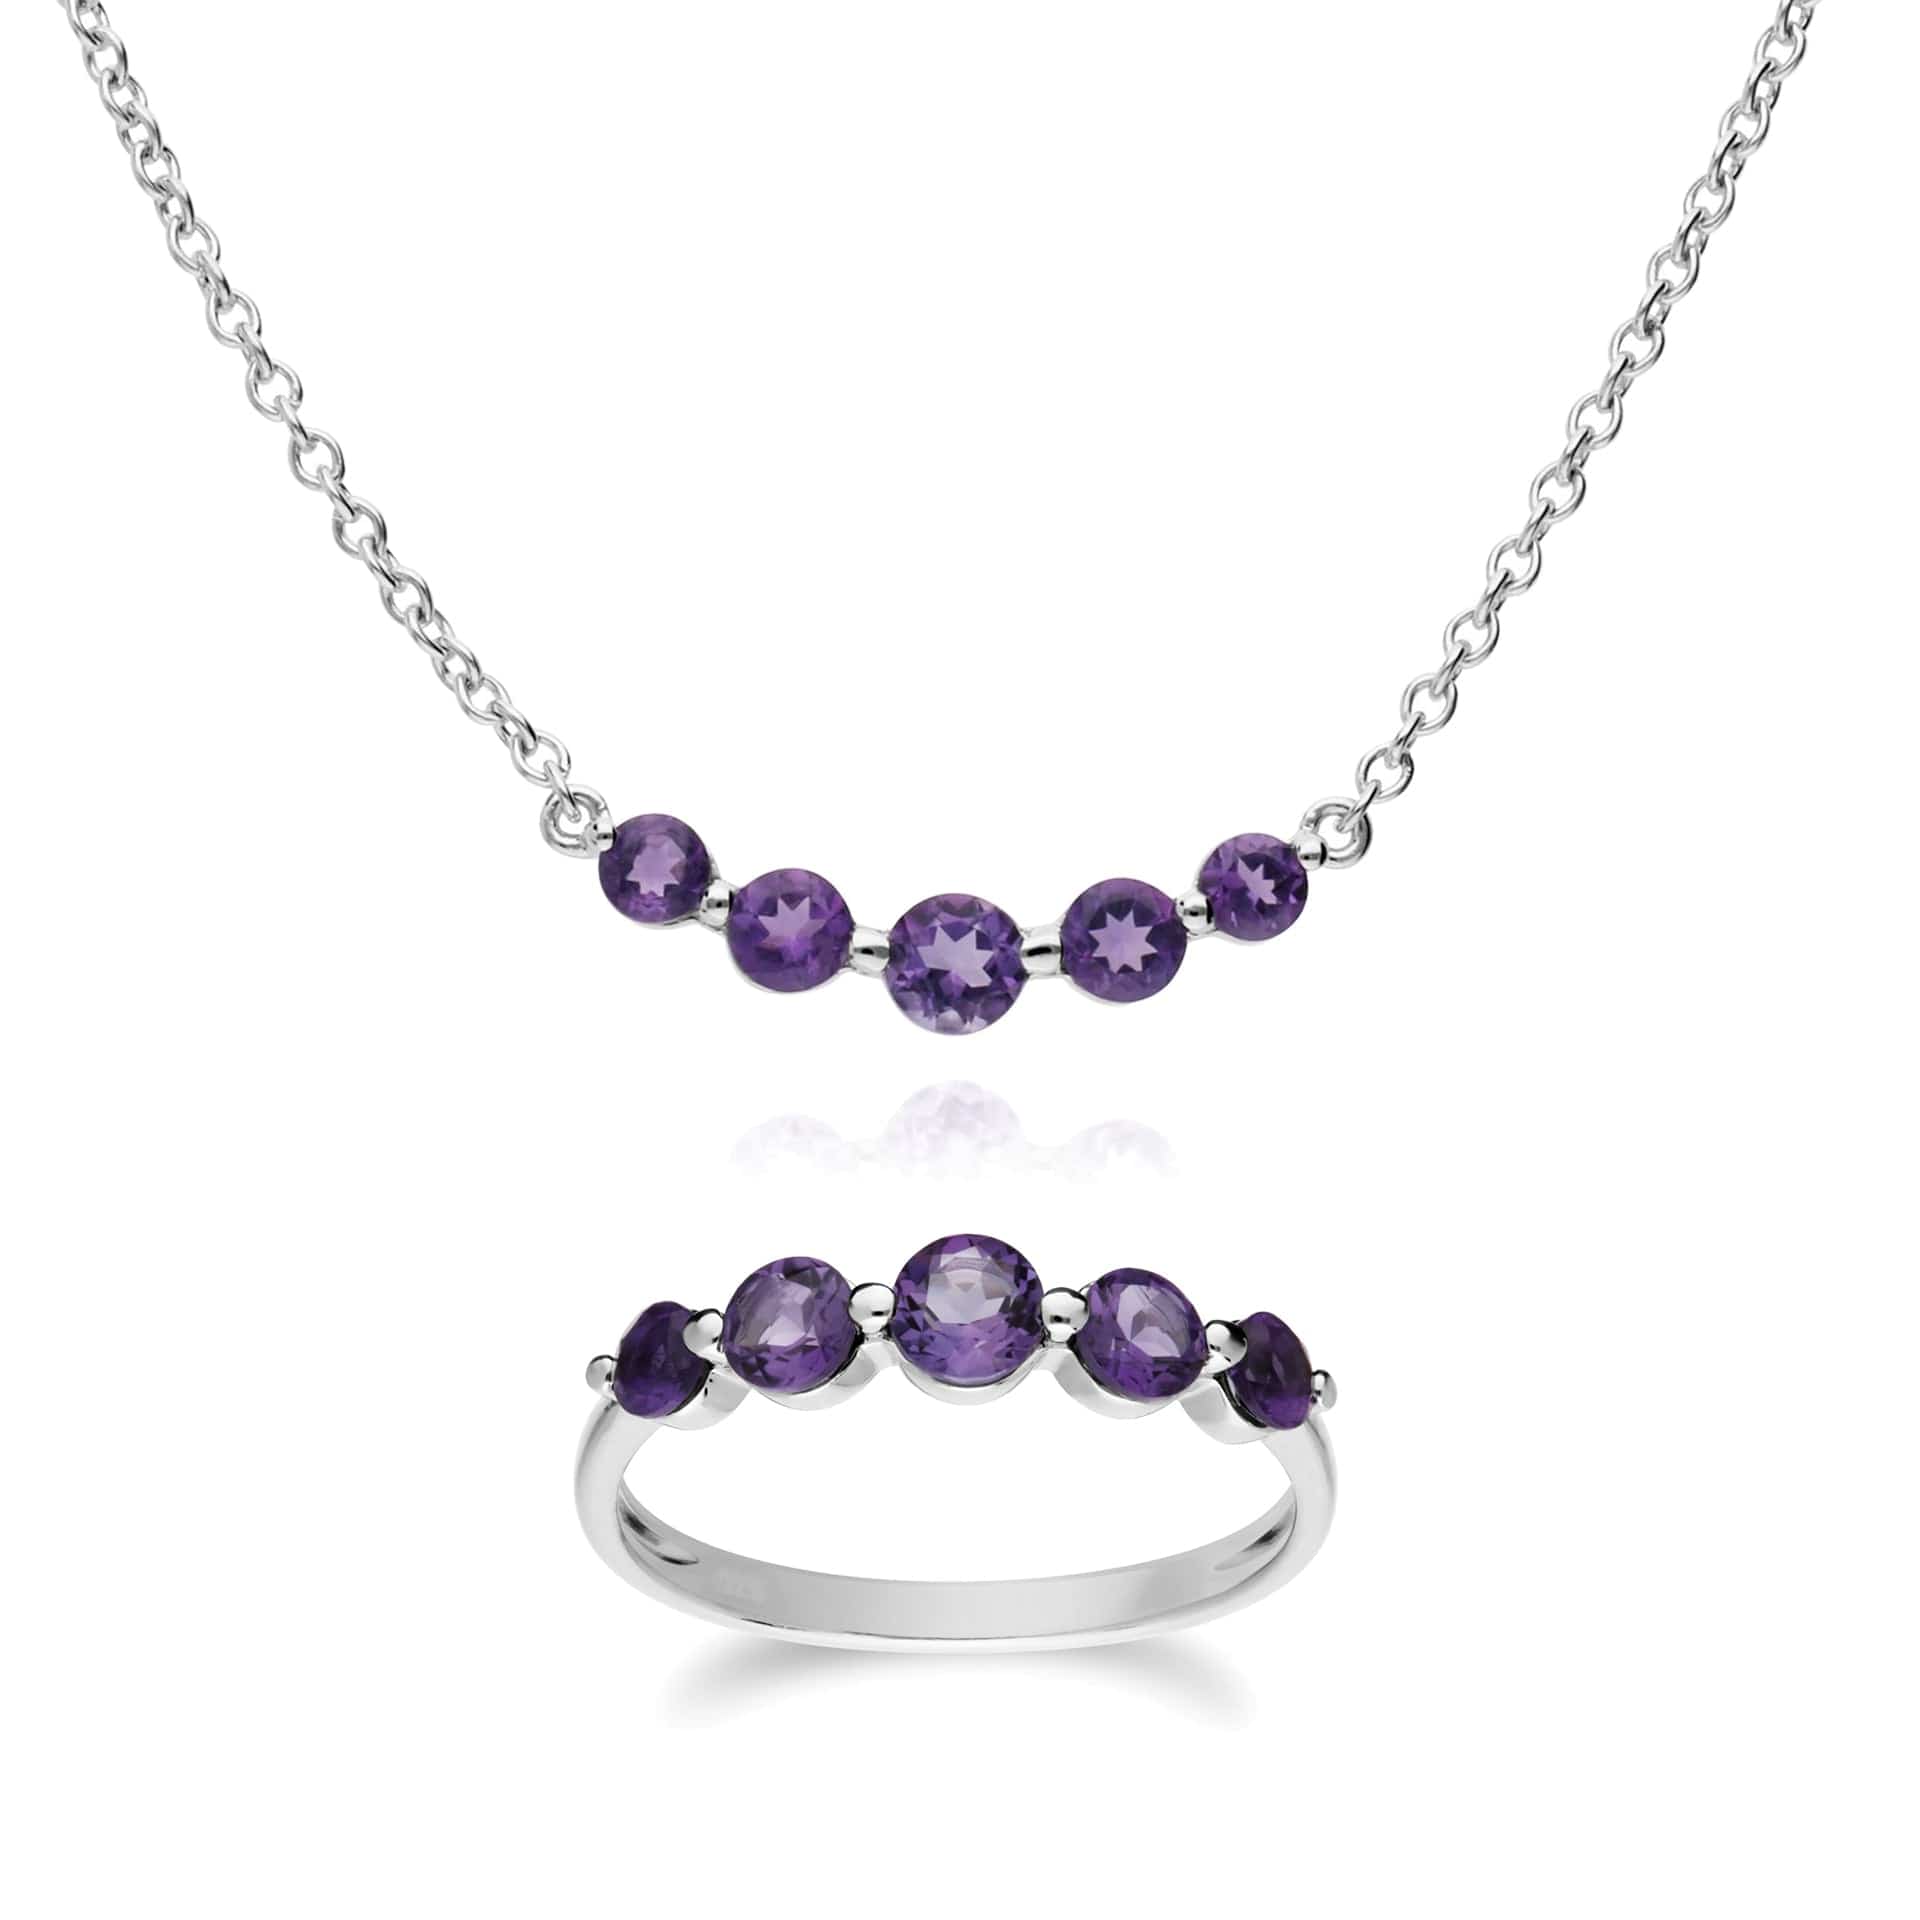 270N034103925-270R055903925 Classic Round Amethyst Five Stone Gradient Ring & Necklace Set in 925 Sterling Silver 1